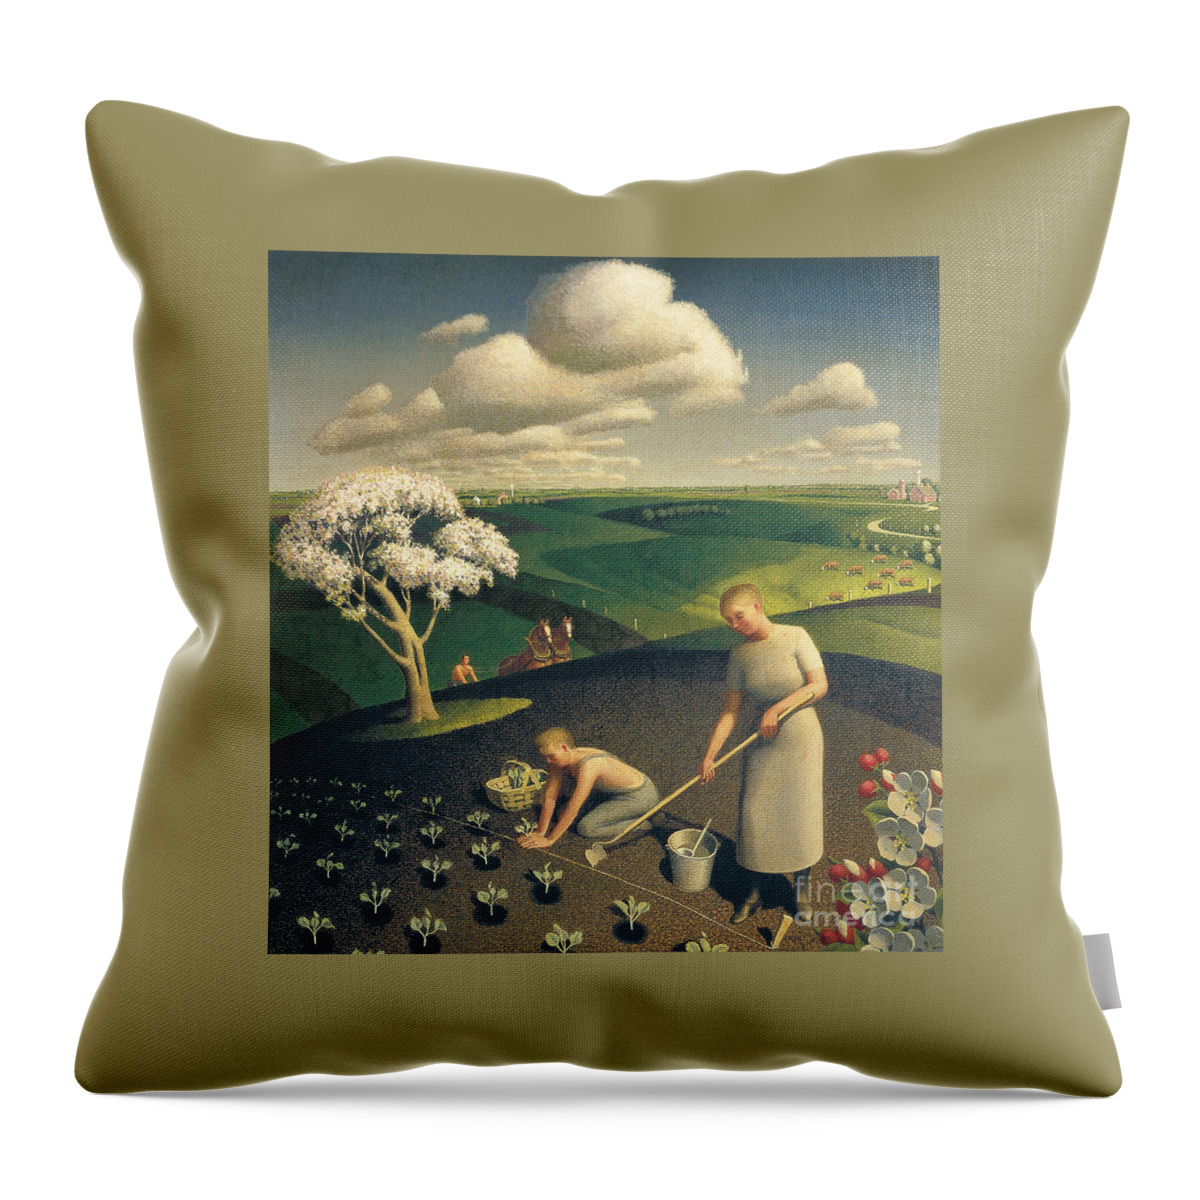 Grant Wood Throw Pillow featuring the painting Grant Wood by MotionAge Designs